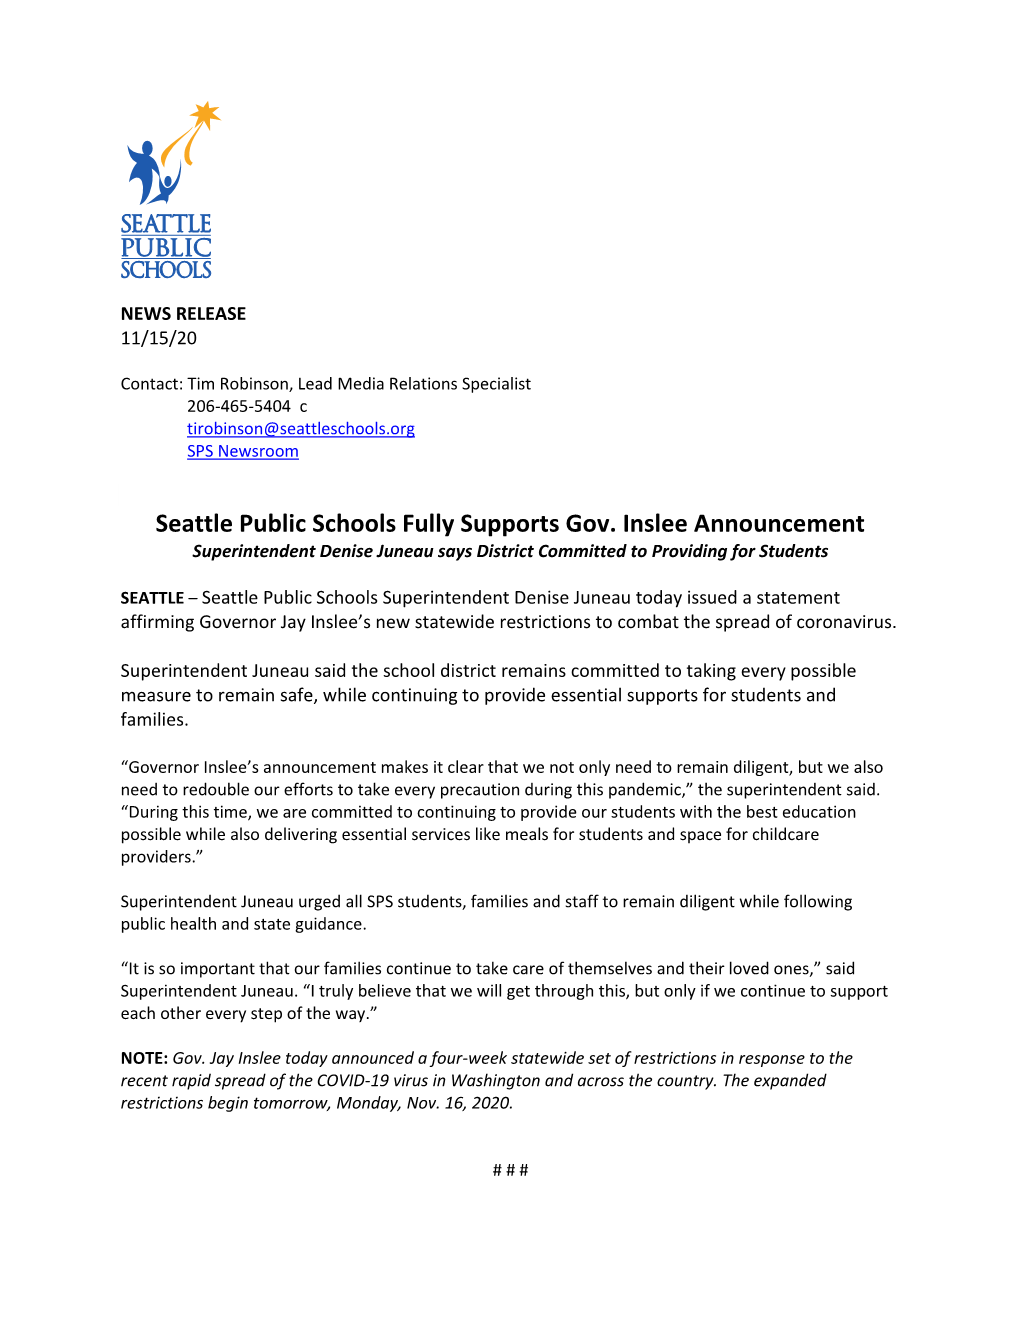 Seattle Public Schools Fully Supports Gov. Inslee Announcement Superintendent Denise Juneau Says District Committed to Providing for Students